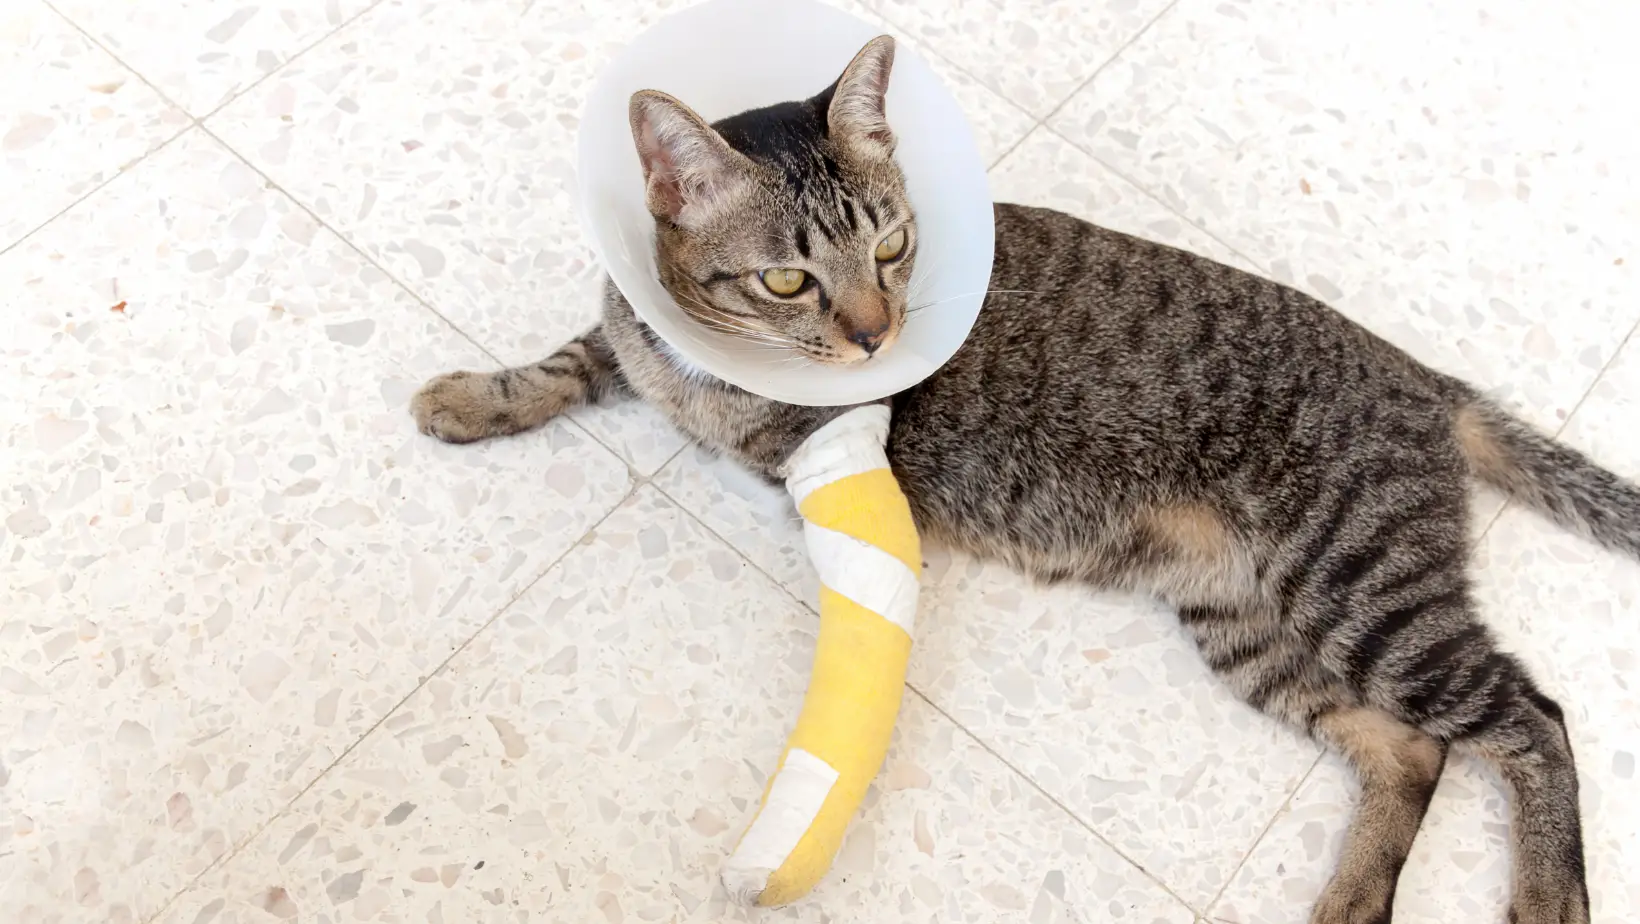 How to Make a Homemade Splint for a Cat?